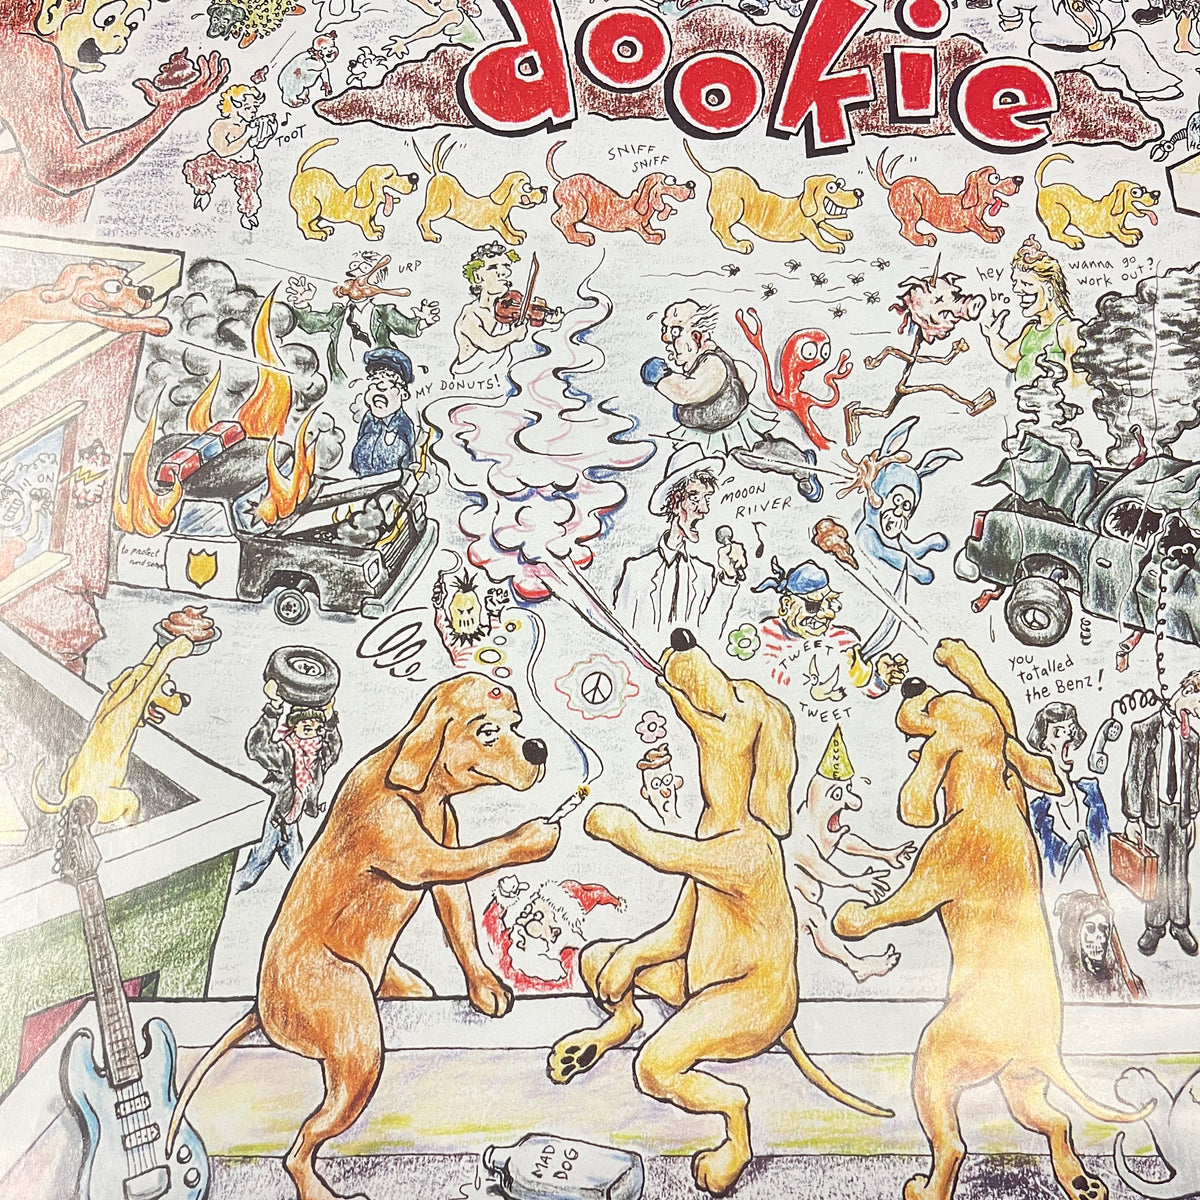 Vintage Green Day &quot;Dookie&quot; Reprise Records Promotional Poster